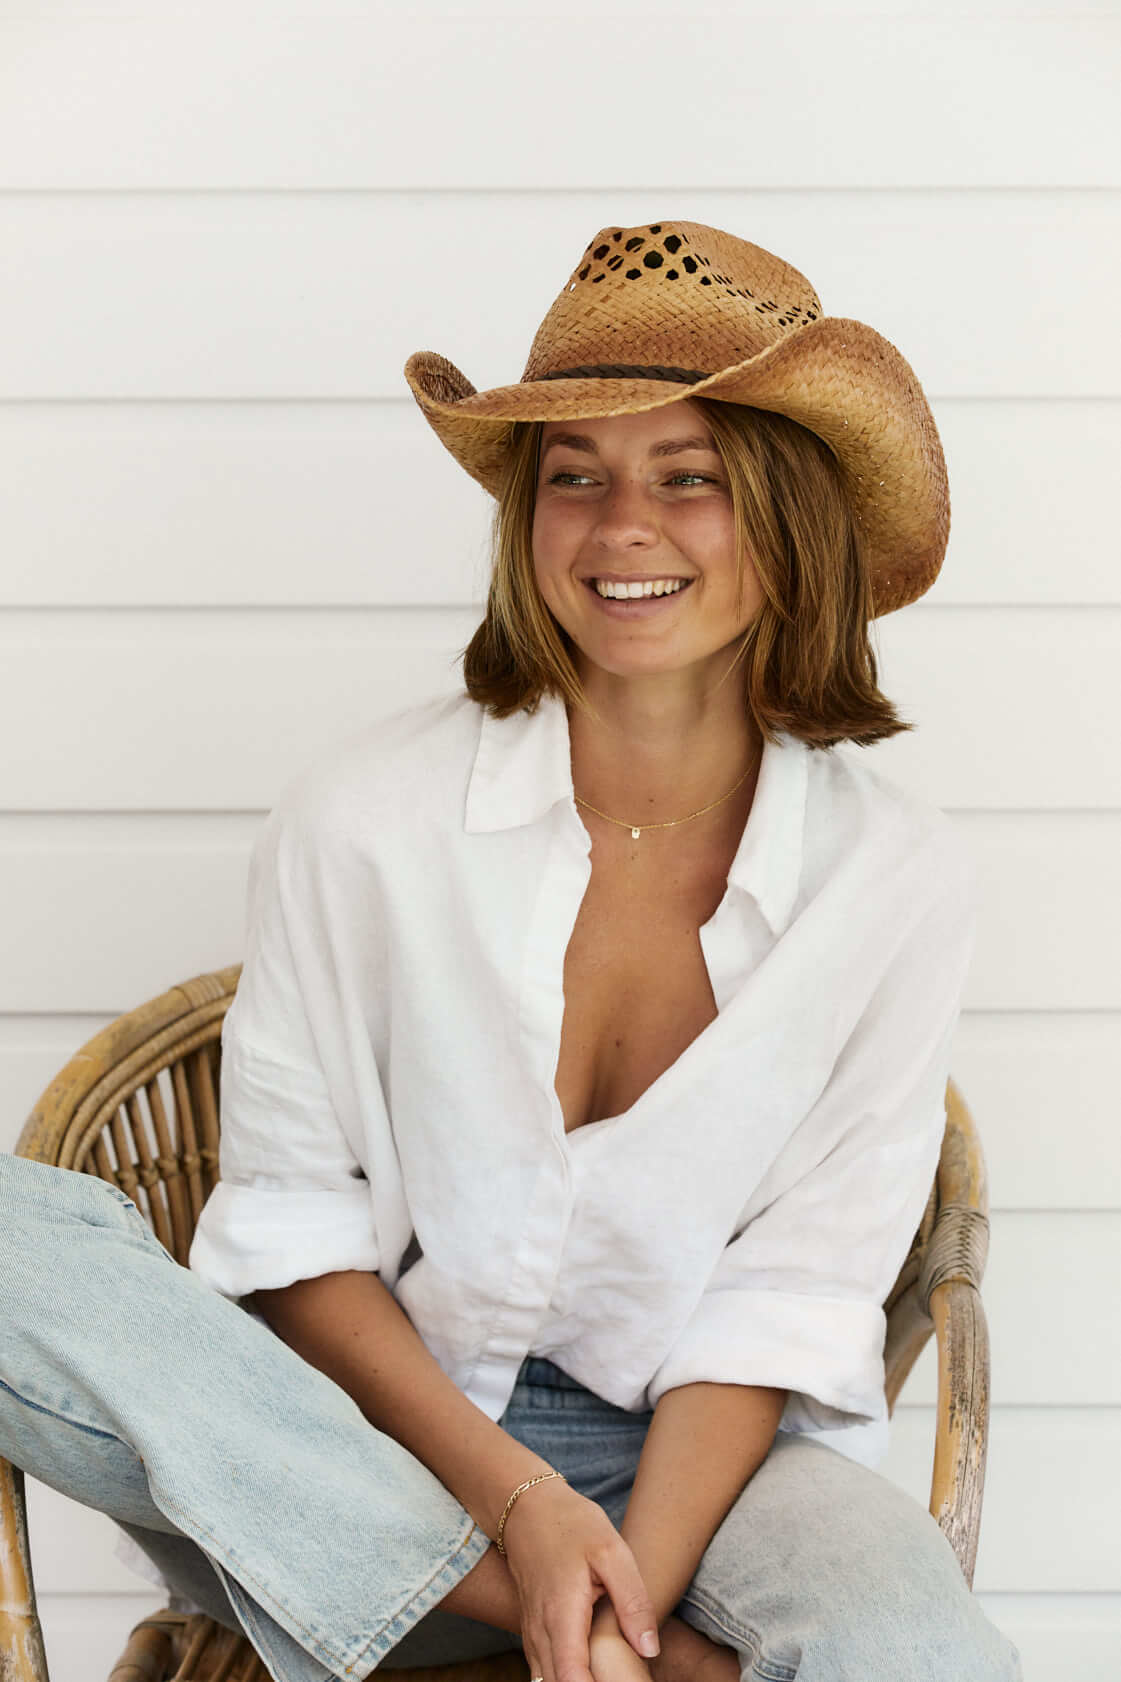 Woman sitting in chair smiling wearing straw Western vented crown hat with vegan leather braided band